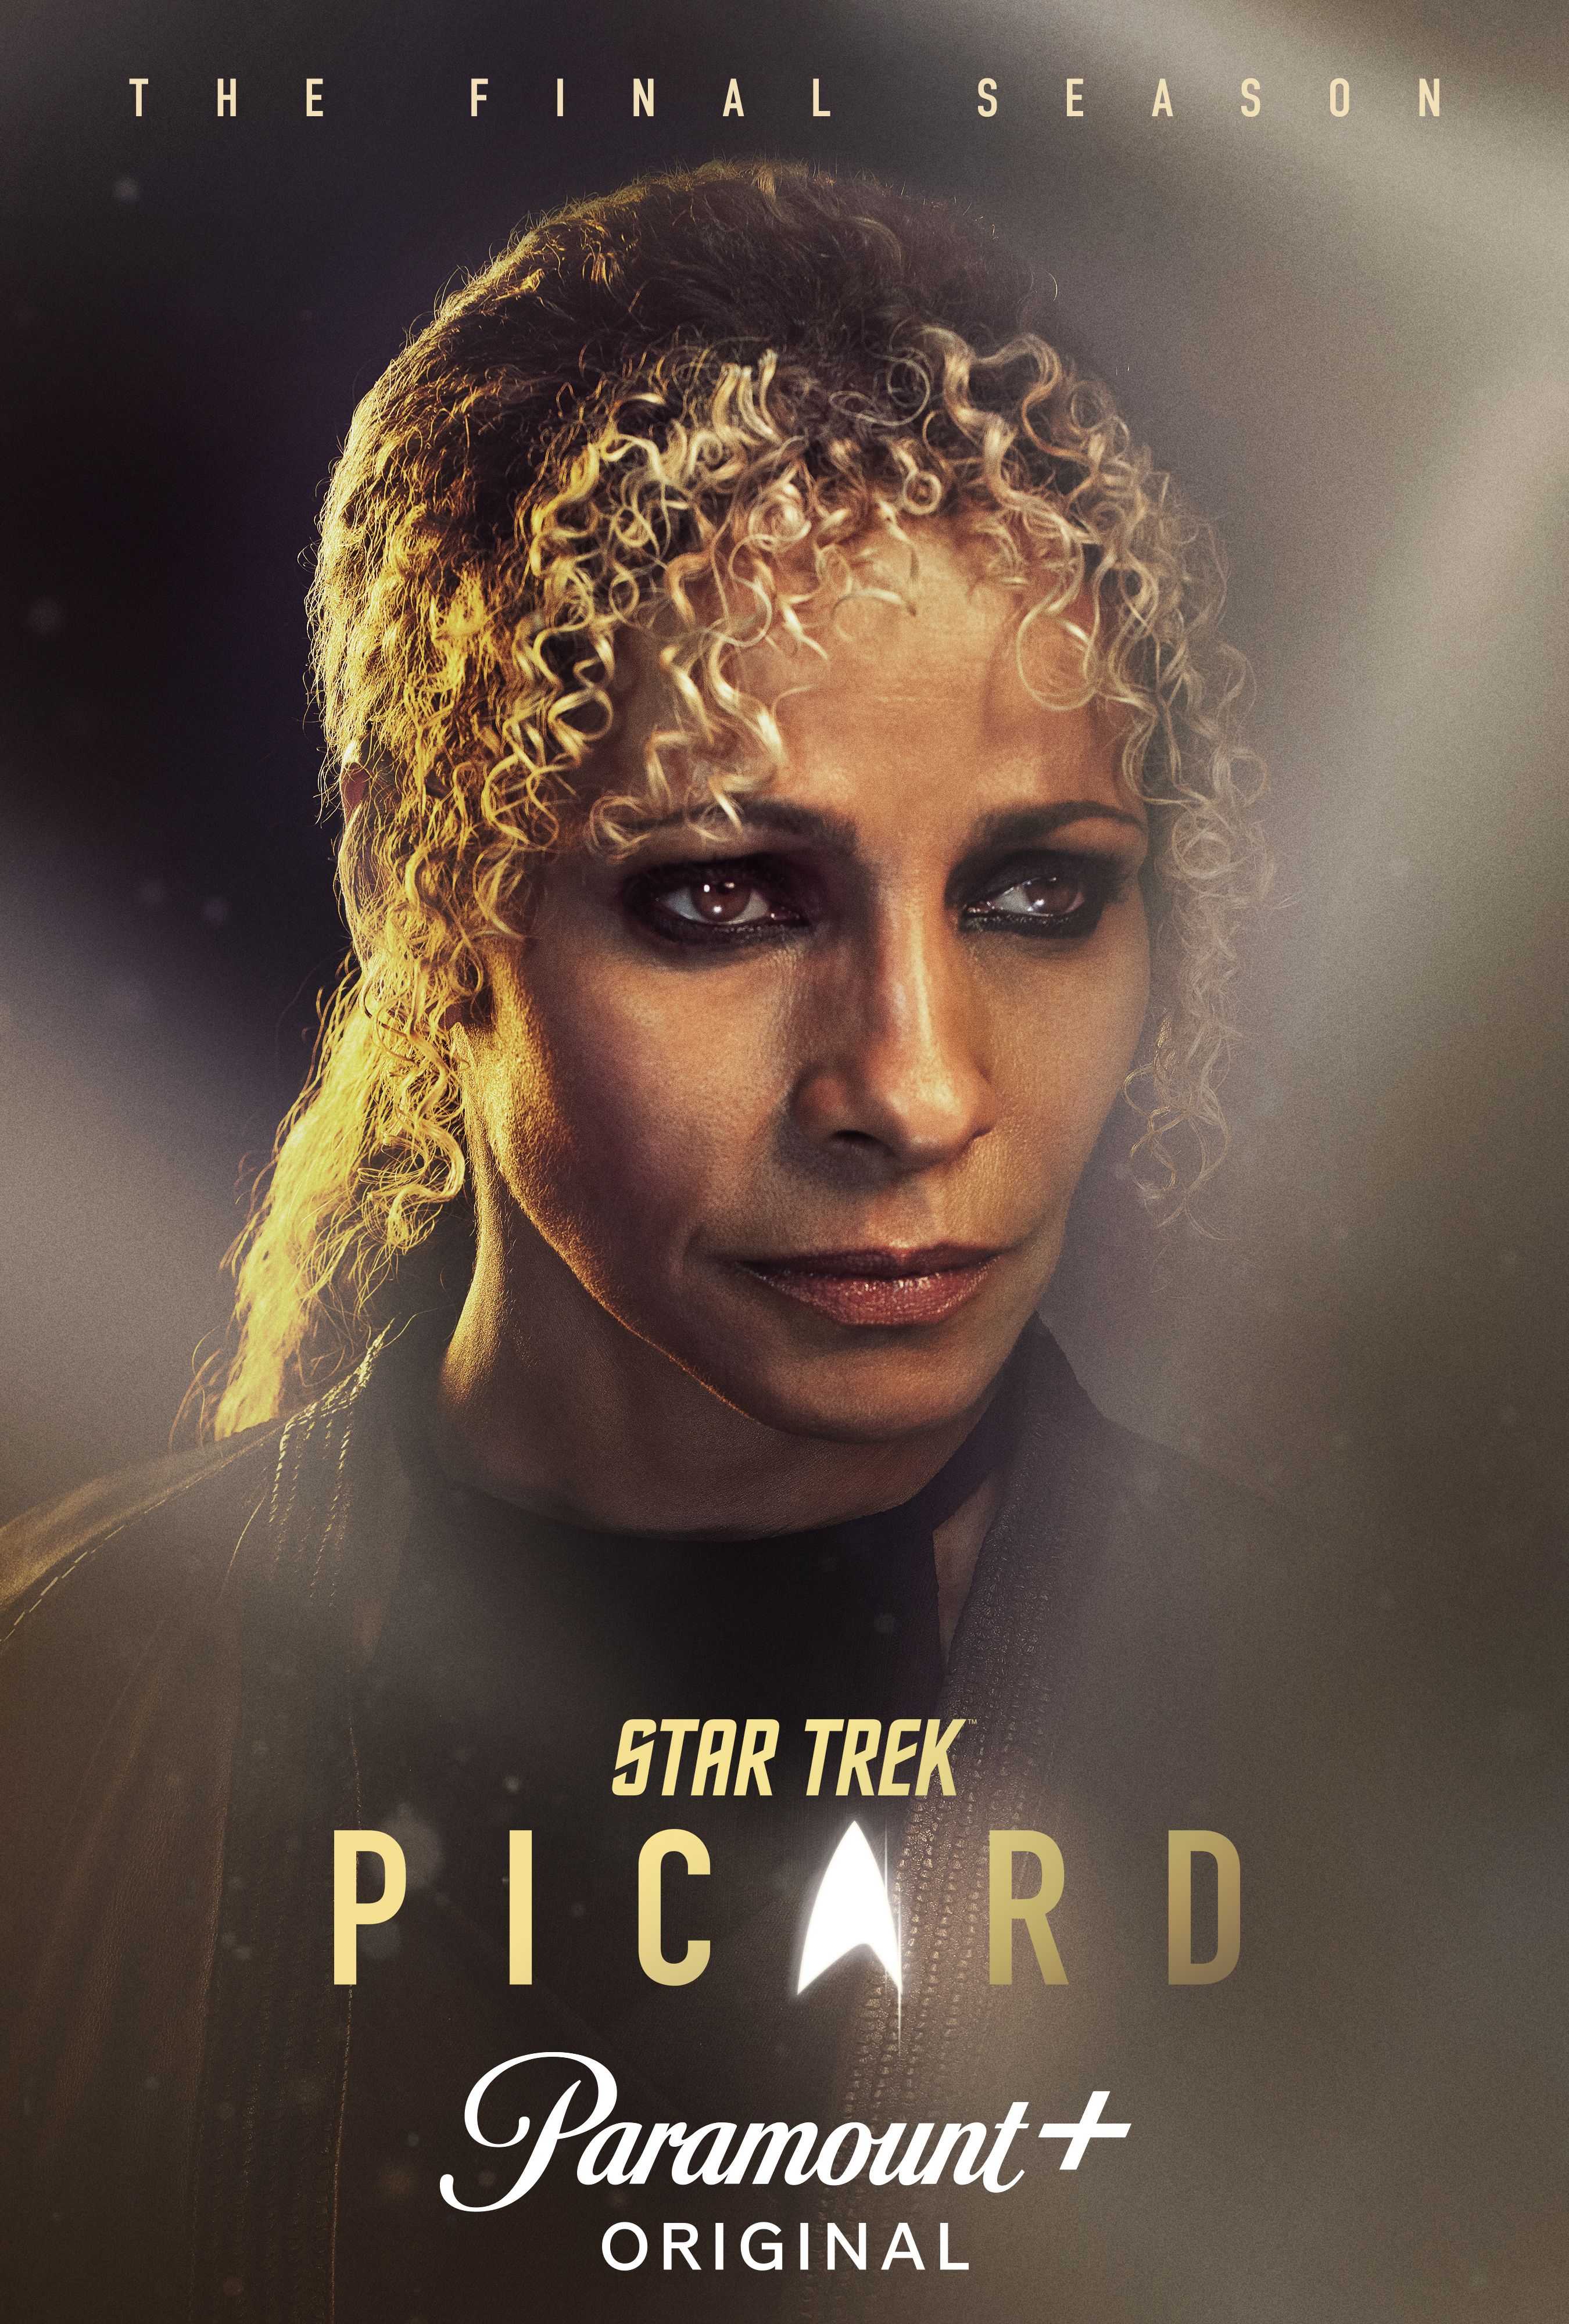 Star Trek Picard S Teaser Highlights Geordi Worf Dr Crusher And More